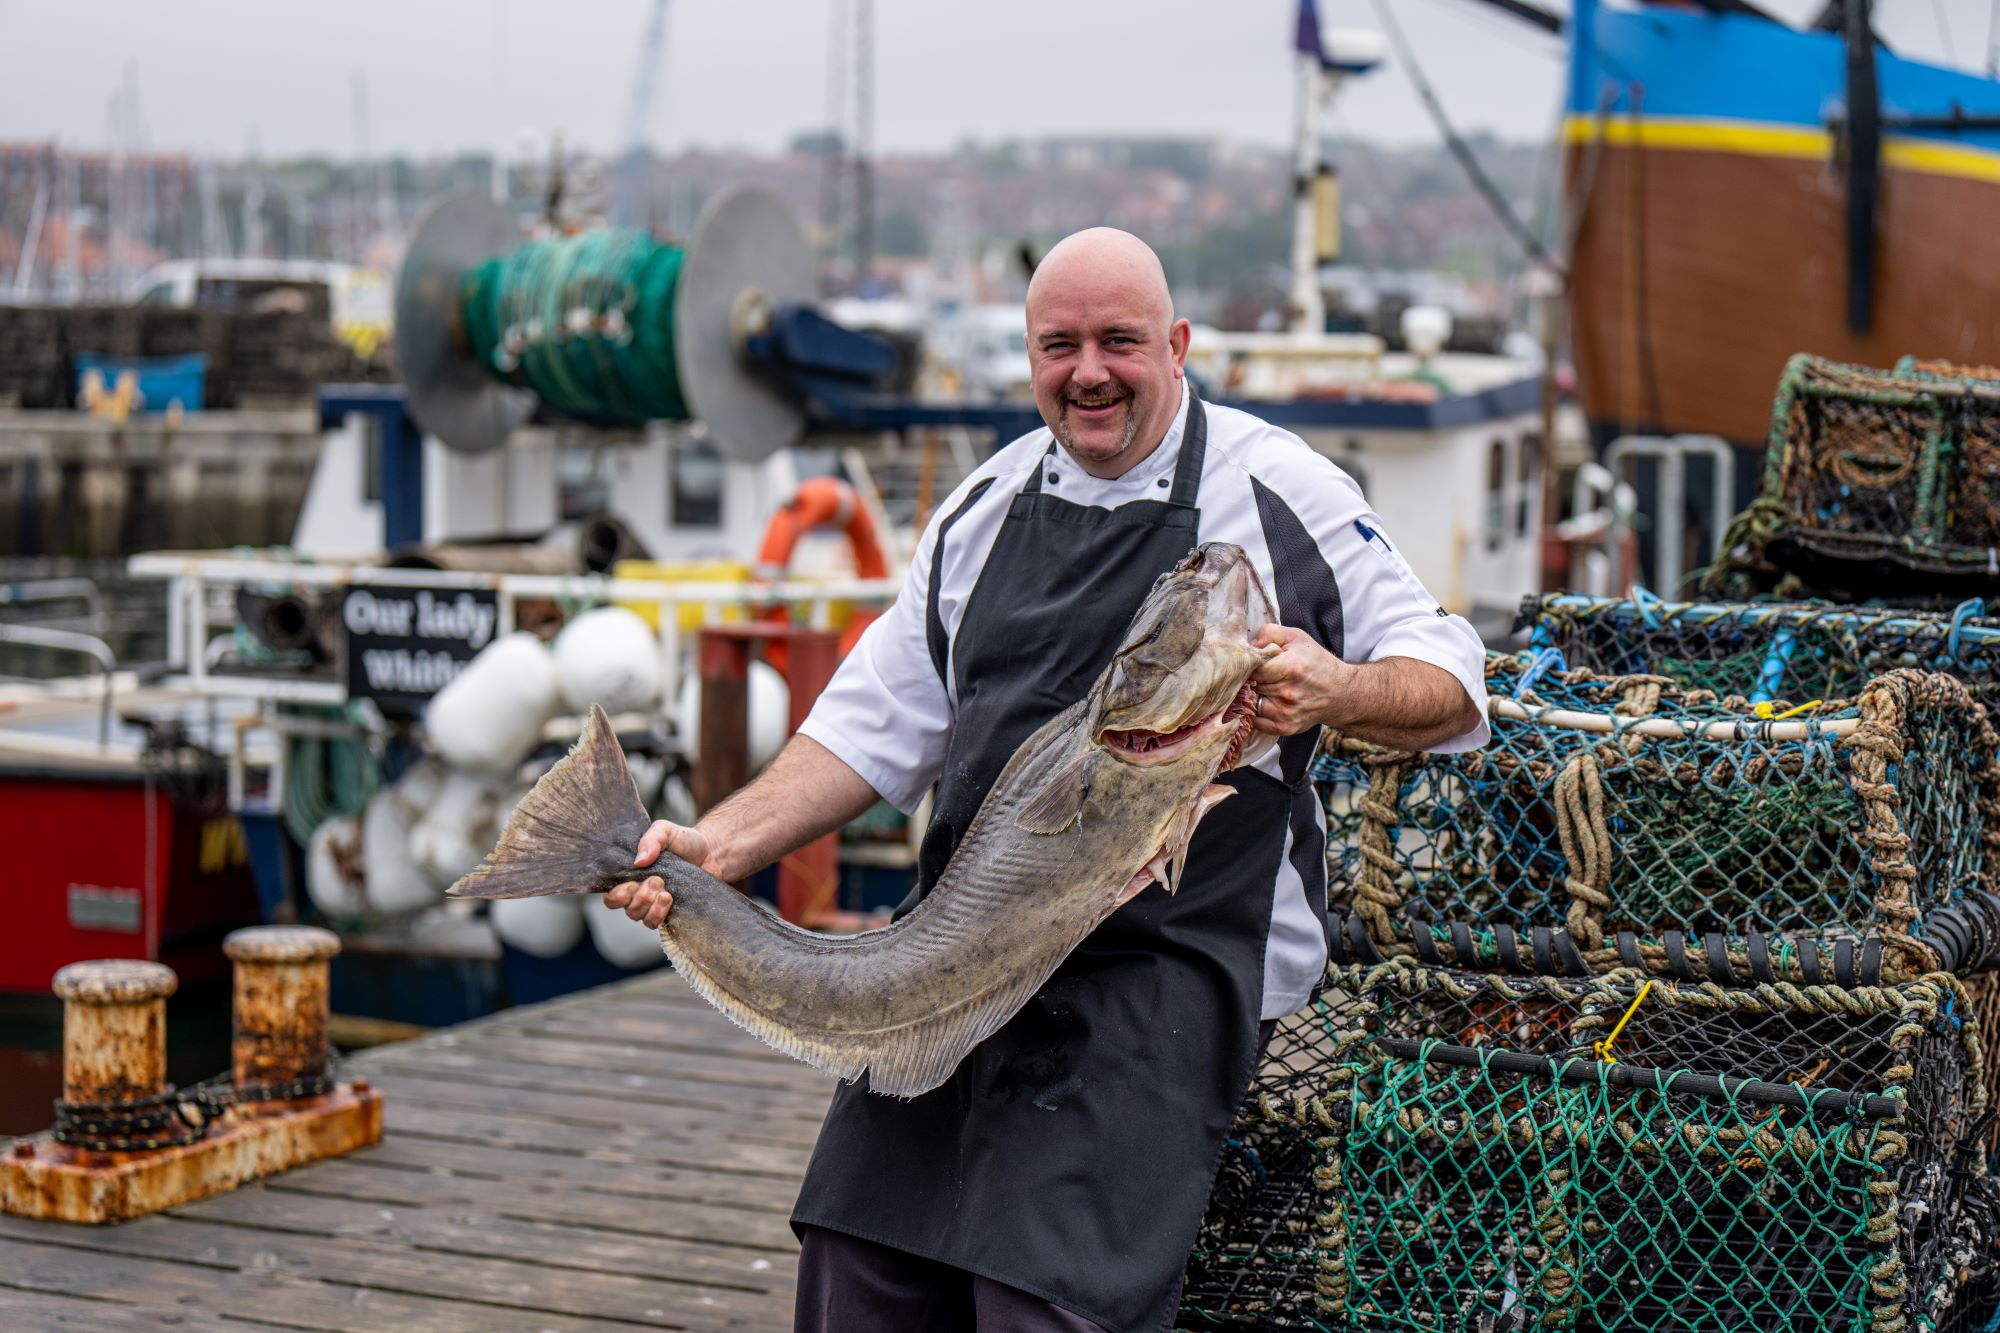 Fish and Ships Paul Gildroy of The Magpie Cafe prepares for Fish and Ships 2022